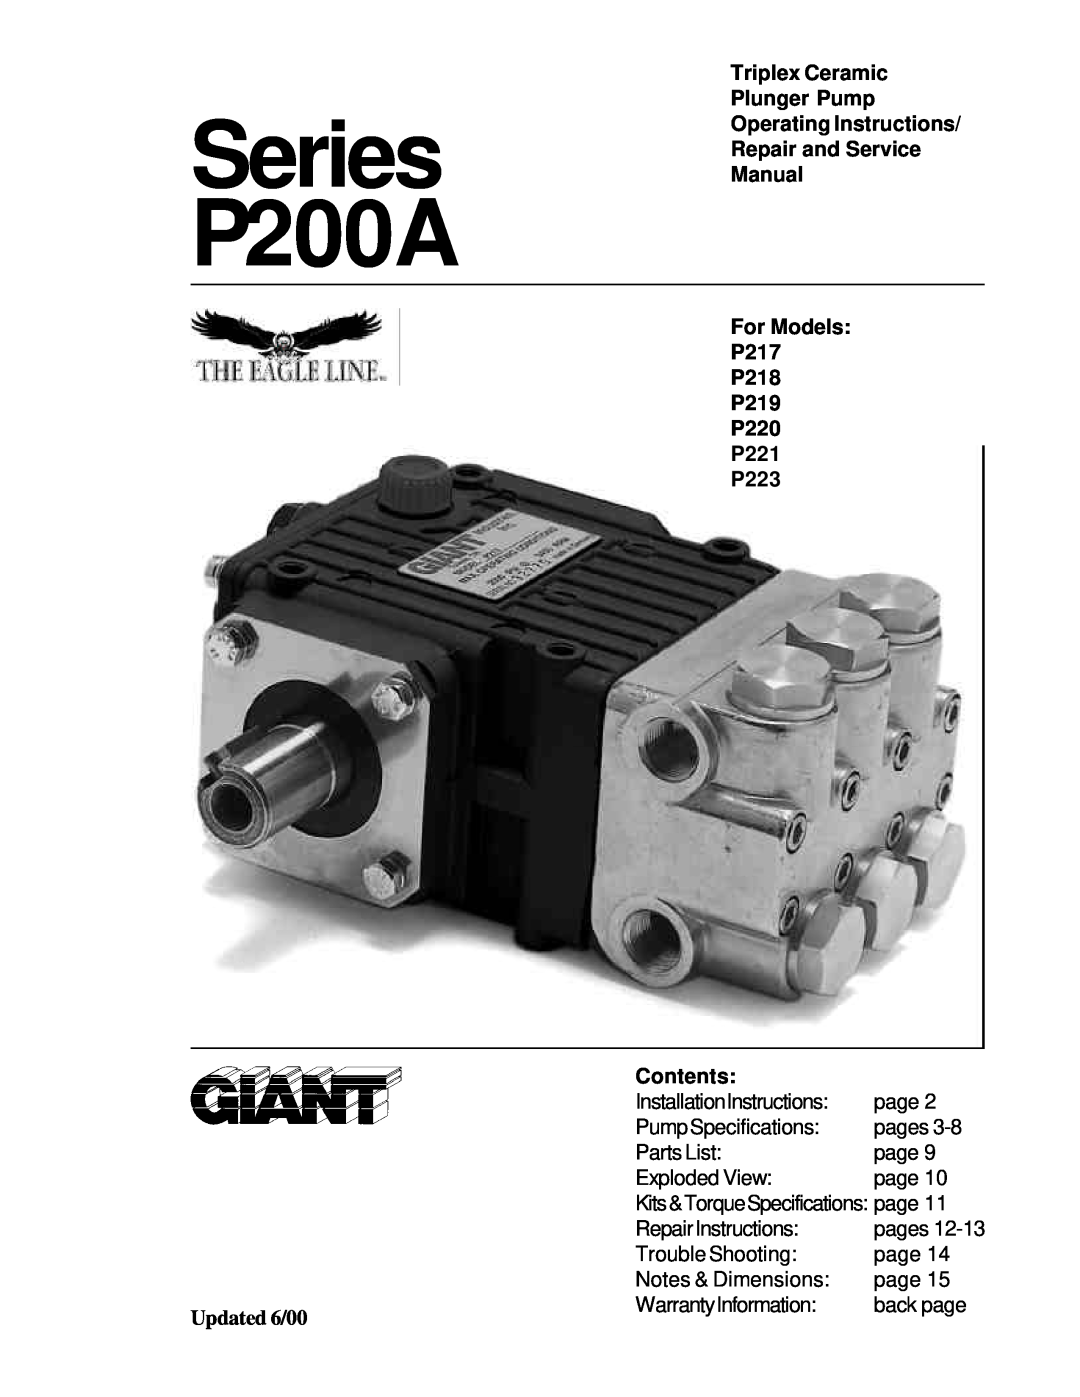 Giant P220 service manual Triplex Ceramic Plunger Pump Series Operating Instructions, Repair and Service Manual, Contents 